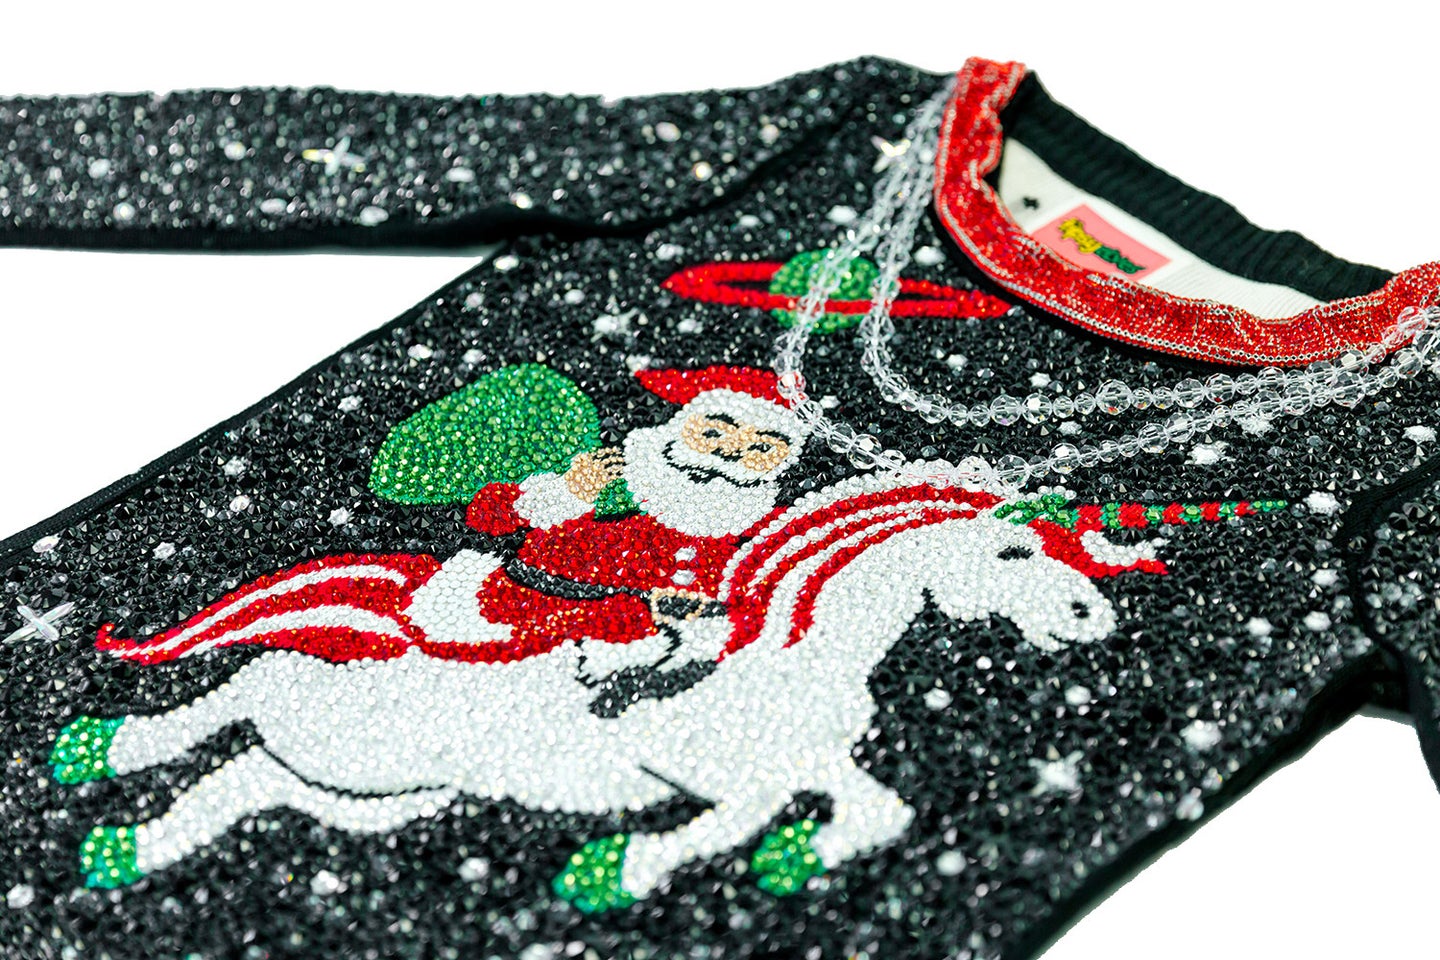 The Most Expensive Ugly Christmas Sweater Ever Is Really $$$ Sweater